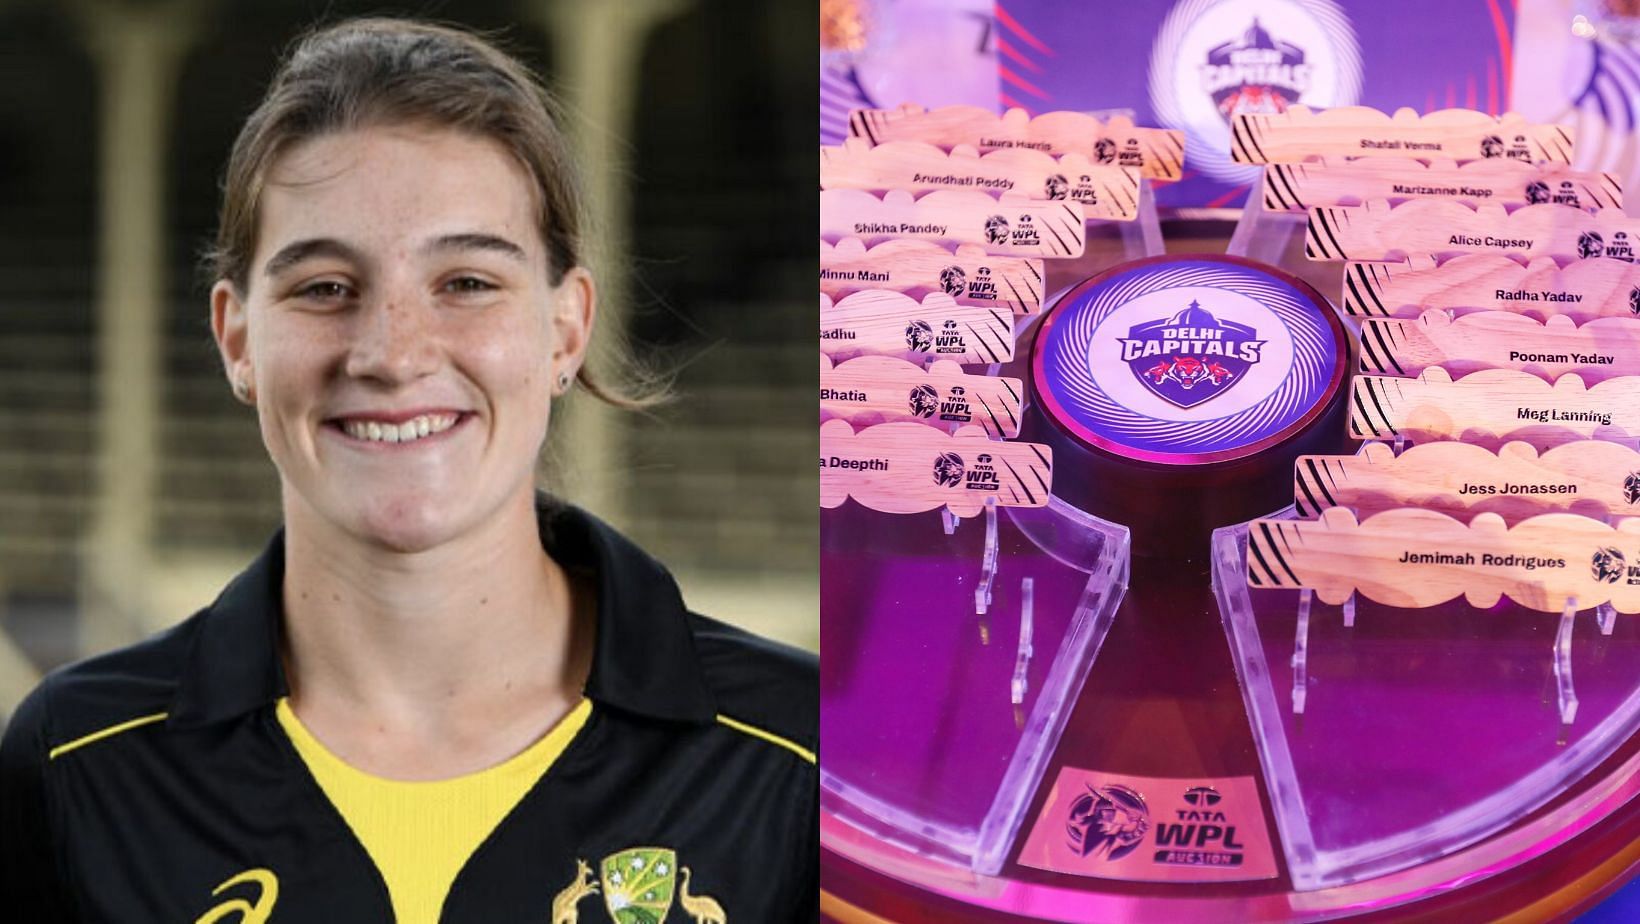 Annabel Sutherland became the latest massive addition to the DC WPL team.